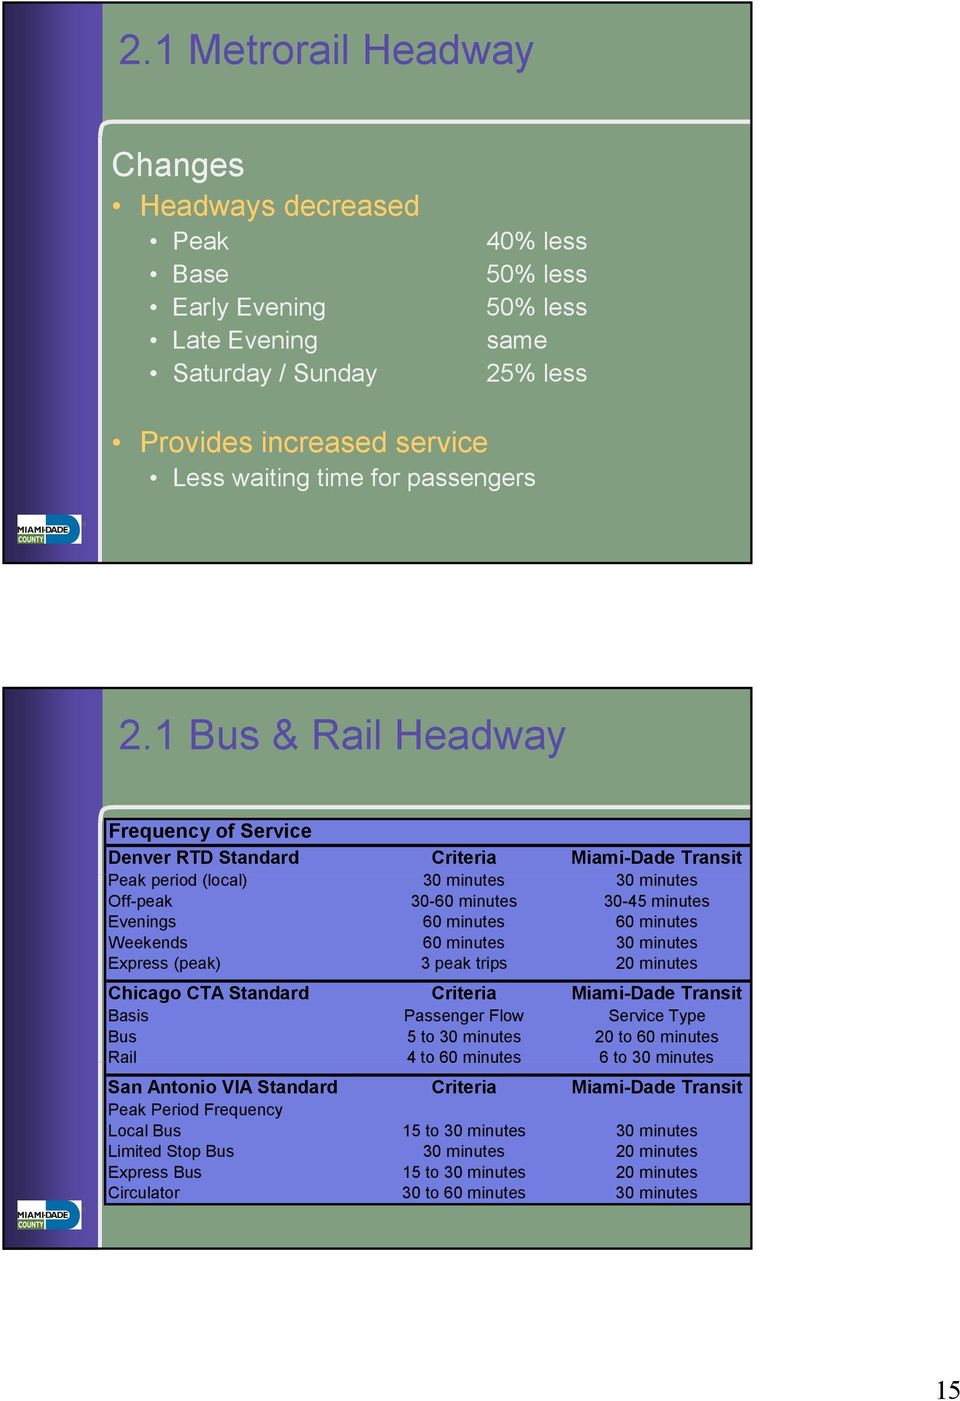 1 Bus & Rail Headway 30 Frequency of Service Denver RTD Standard Criteria Miami-Dade Transit Peak period (local) l) 30 minutes 30 minutes Off-peak 30-60 minutes 30-45 minutes Evenings 60 minutes 60